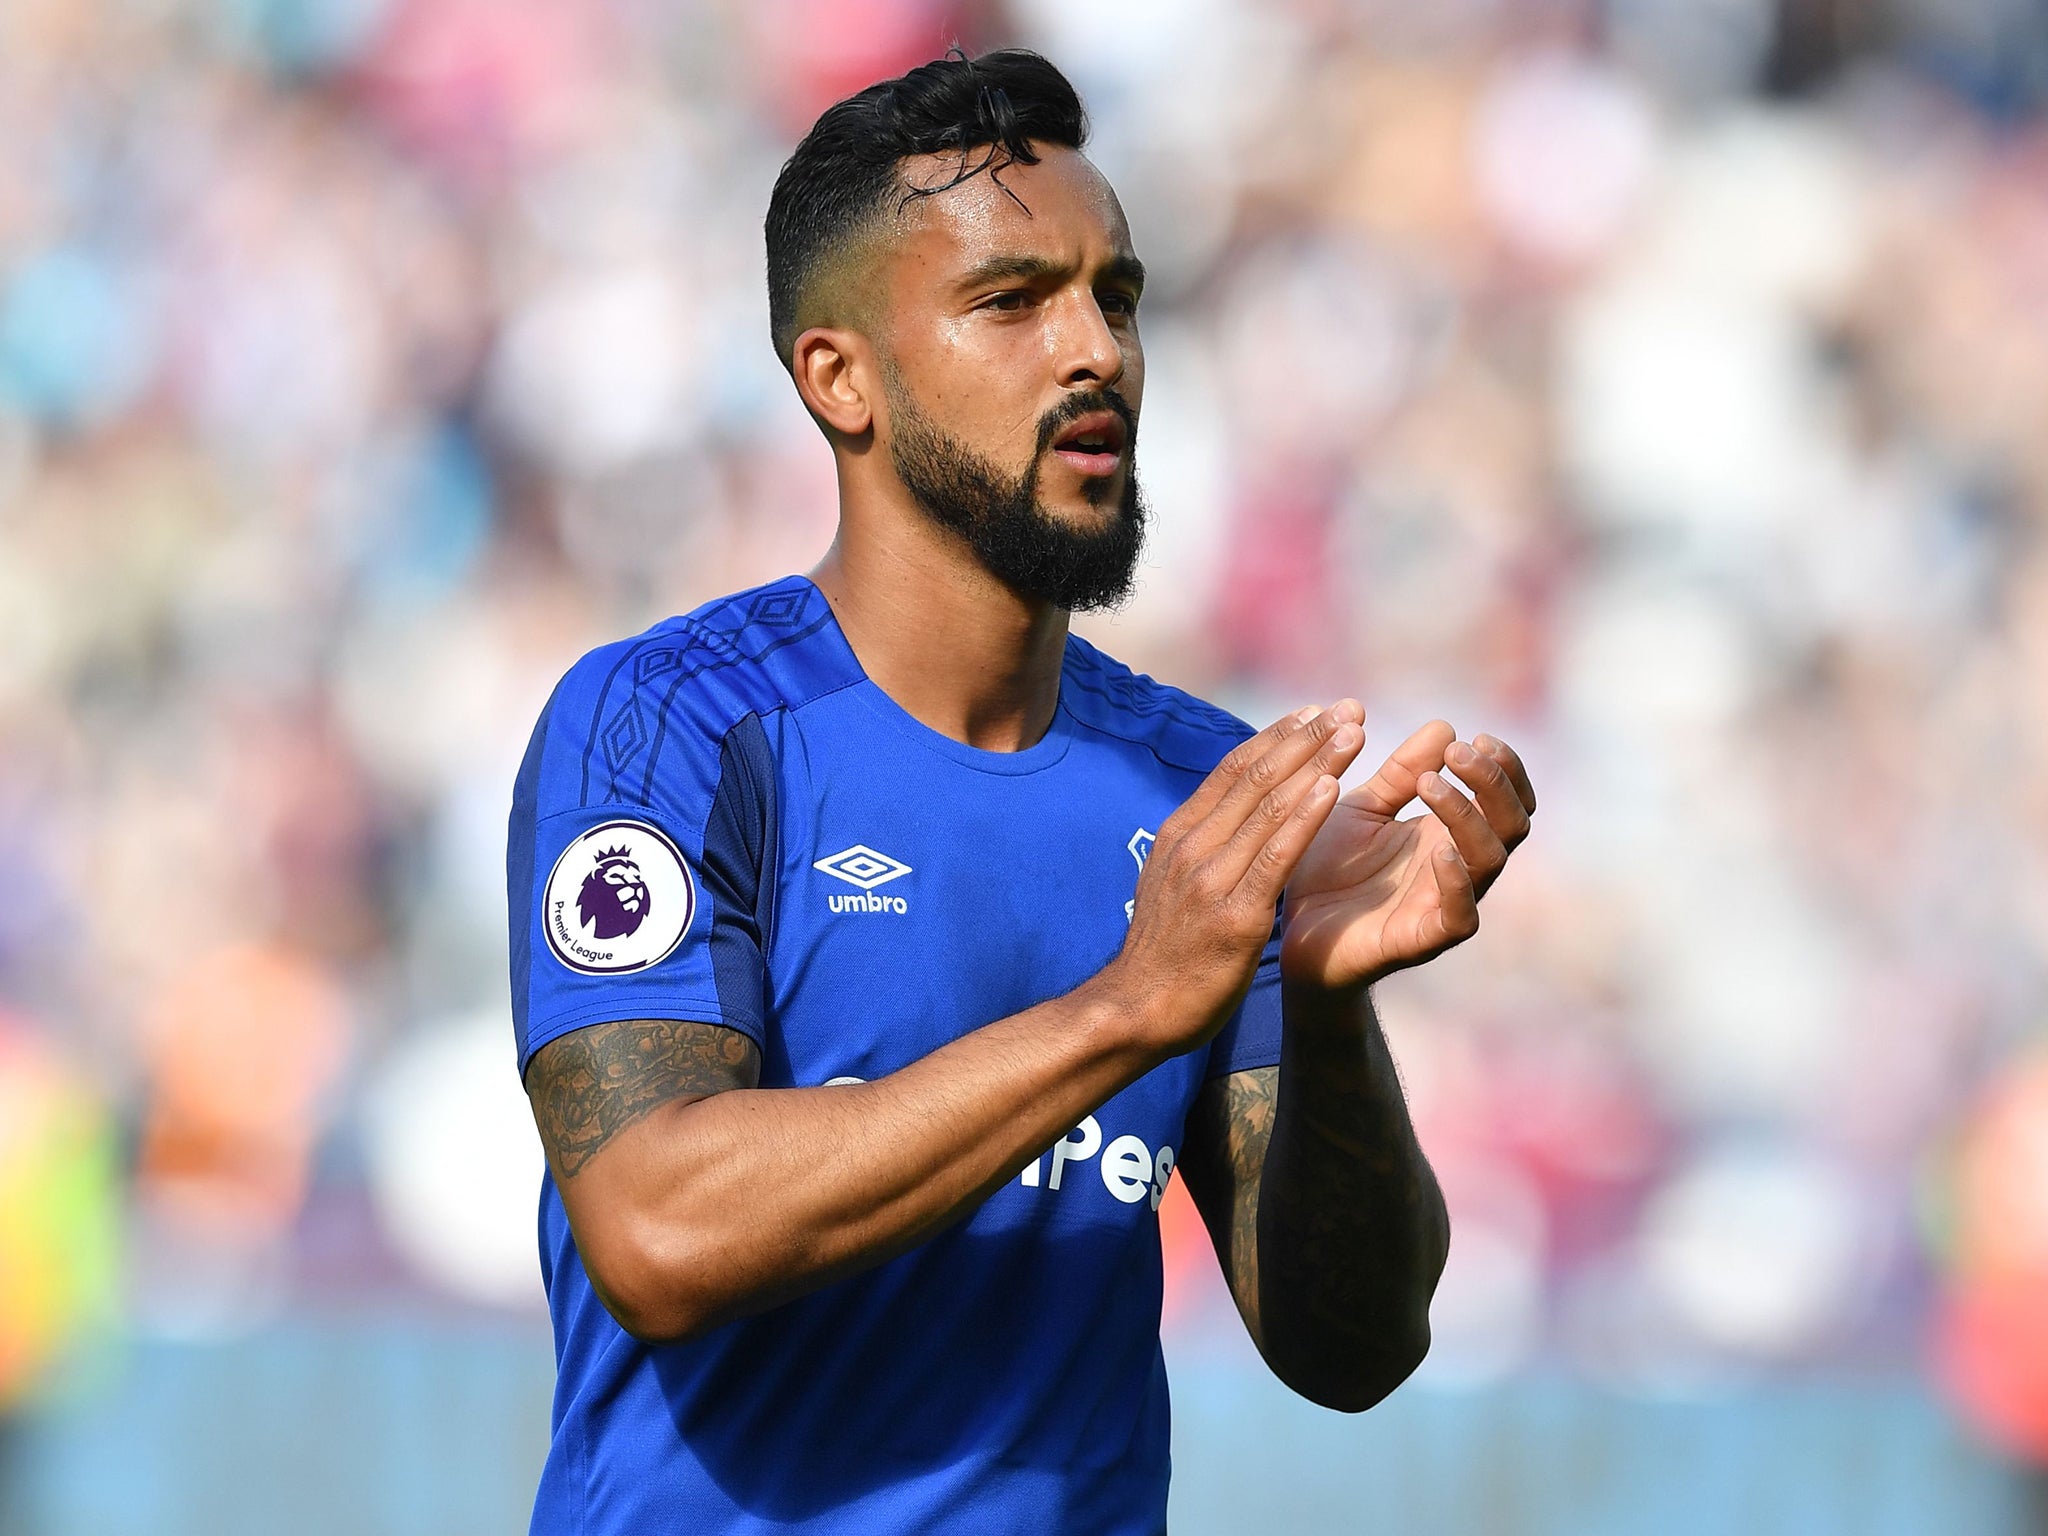 There's more to come from Walcott at Everton